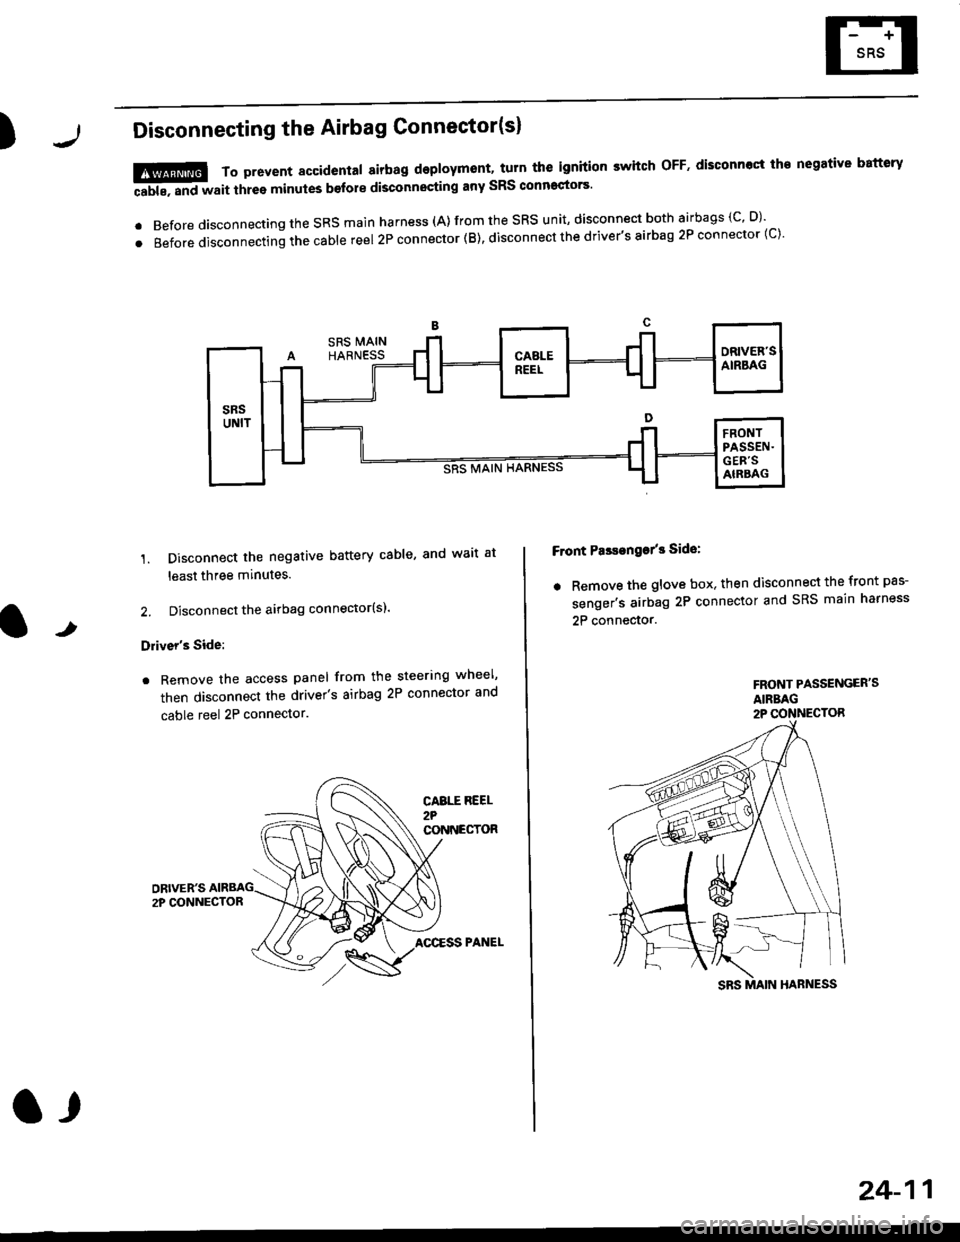 HONDA CIVIC 1998 6.G Workshop Manual )Disconnecting the Airbag Connector(sl
1. Disconnect the negative battery cable, and wait at
least three minutes.
2. Disconnect the airbag connector(sl.
Drivers Side:
. Remove the access panel from 